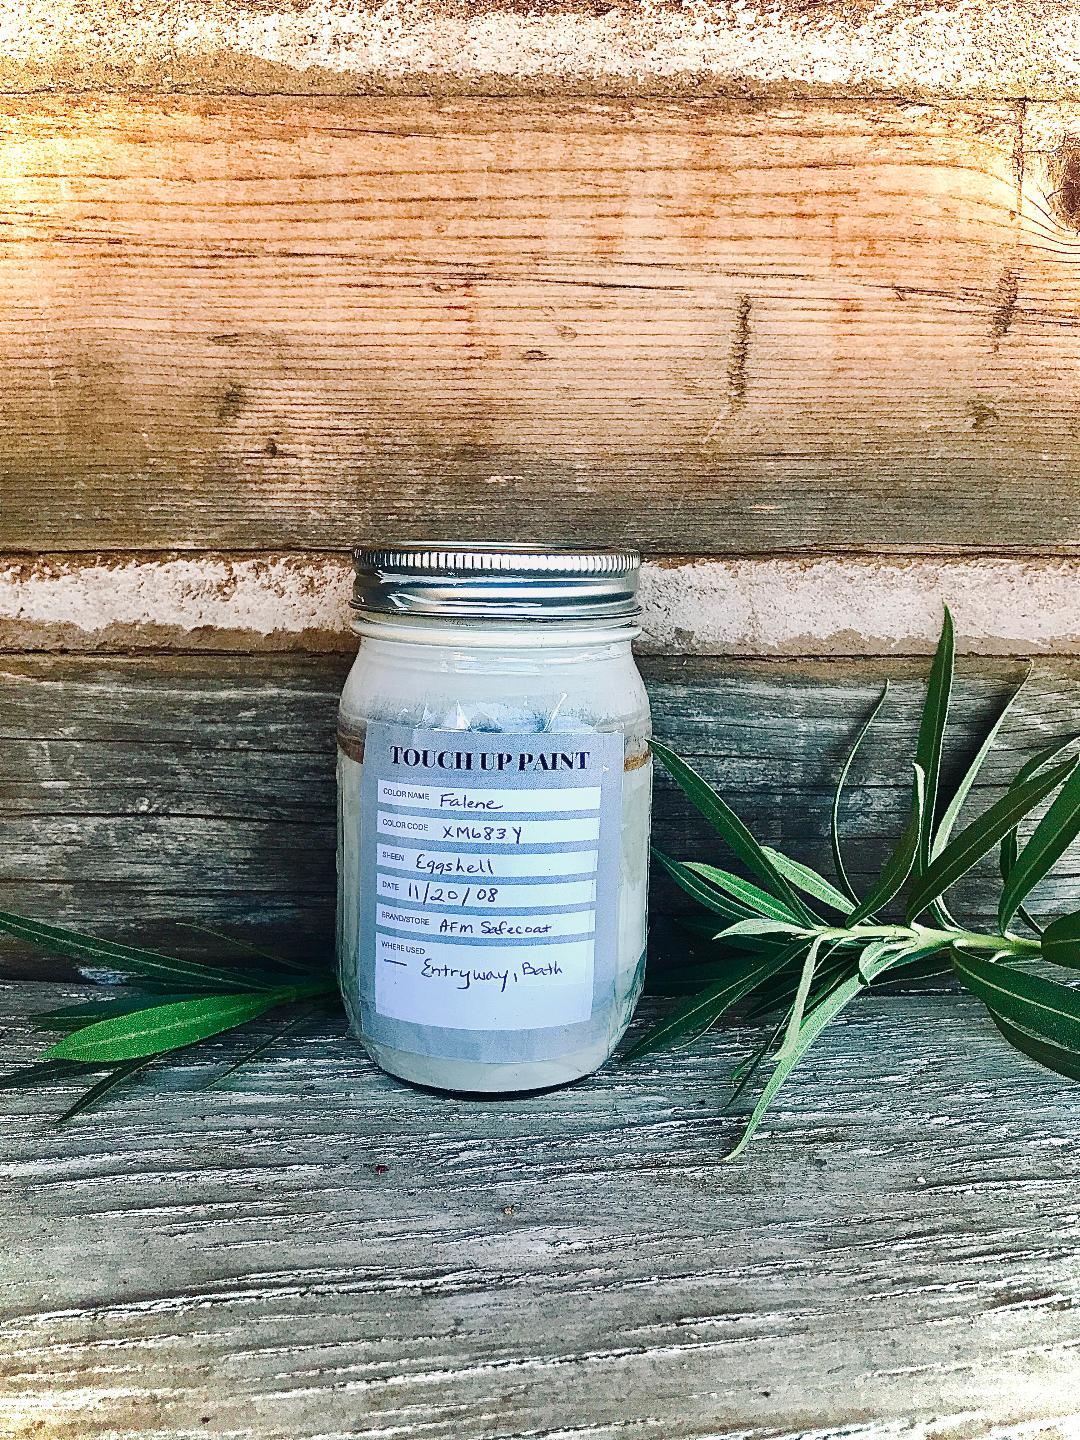 canning jar with a label sitting outside in a natural looking setting